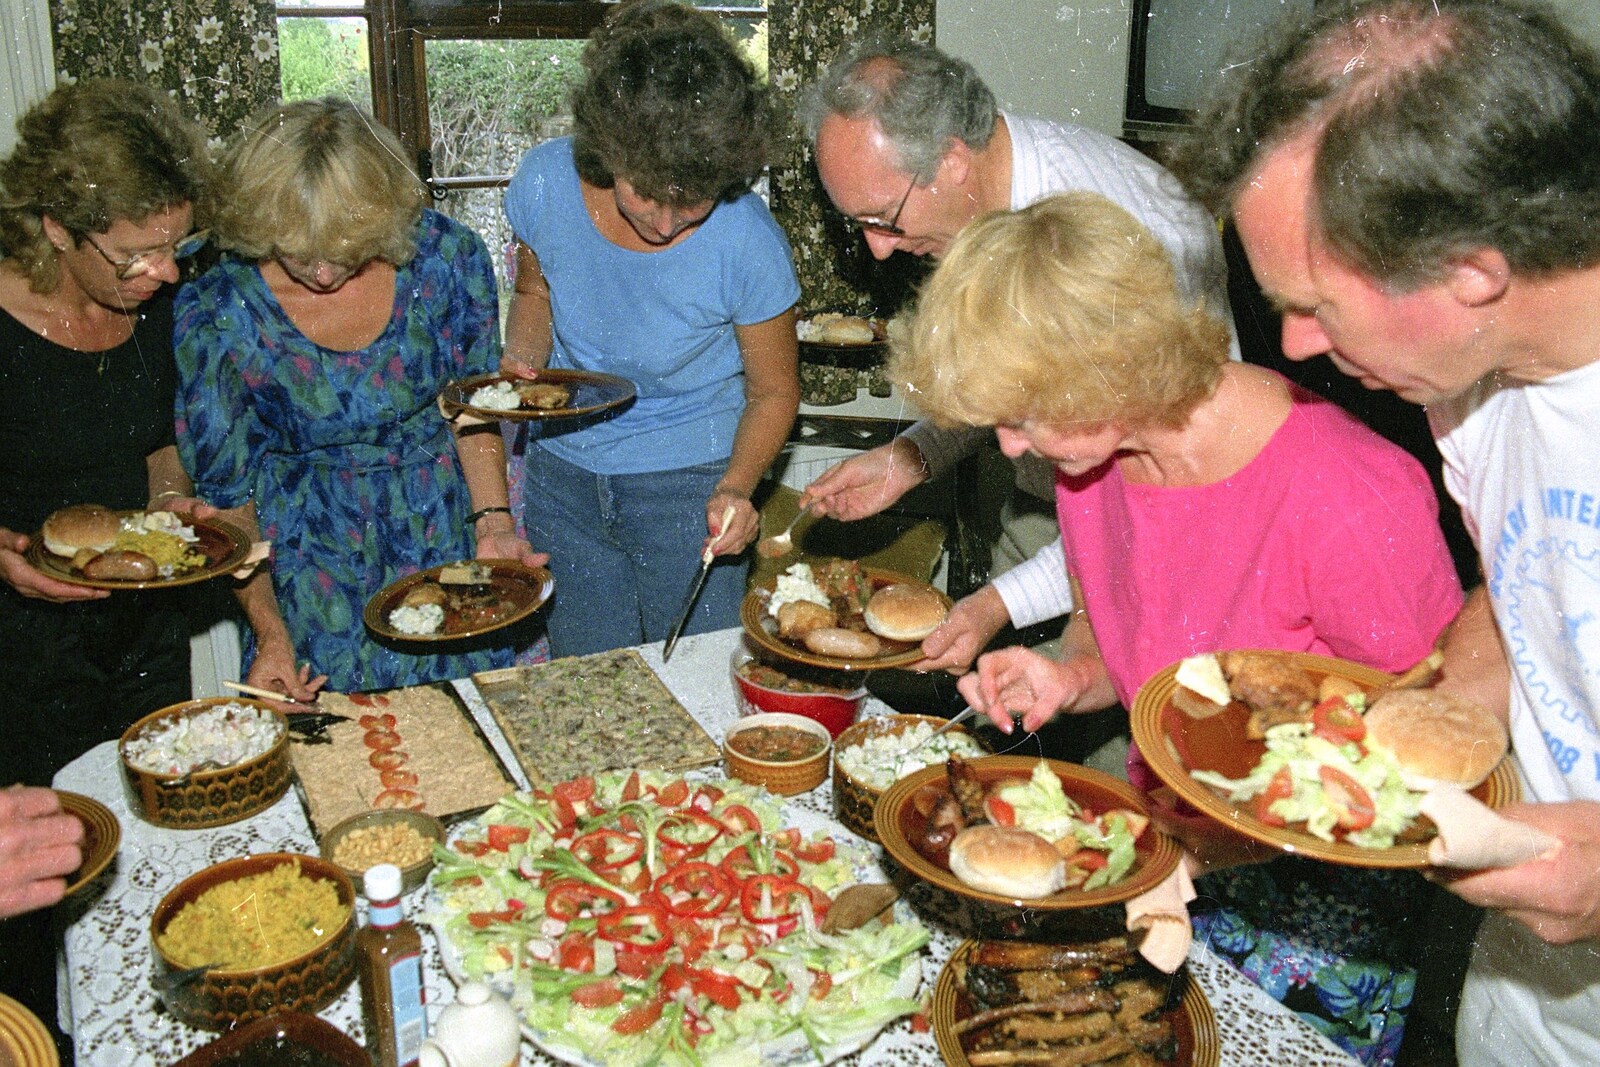 Brenda puts on a massive spread from A Bike Ride to Redgrave, Suffolk - 11th August 1990